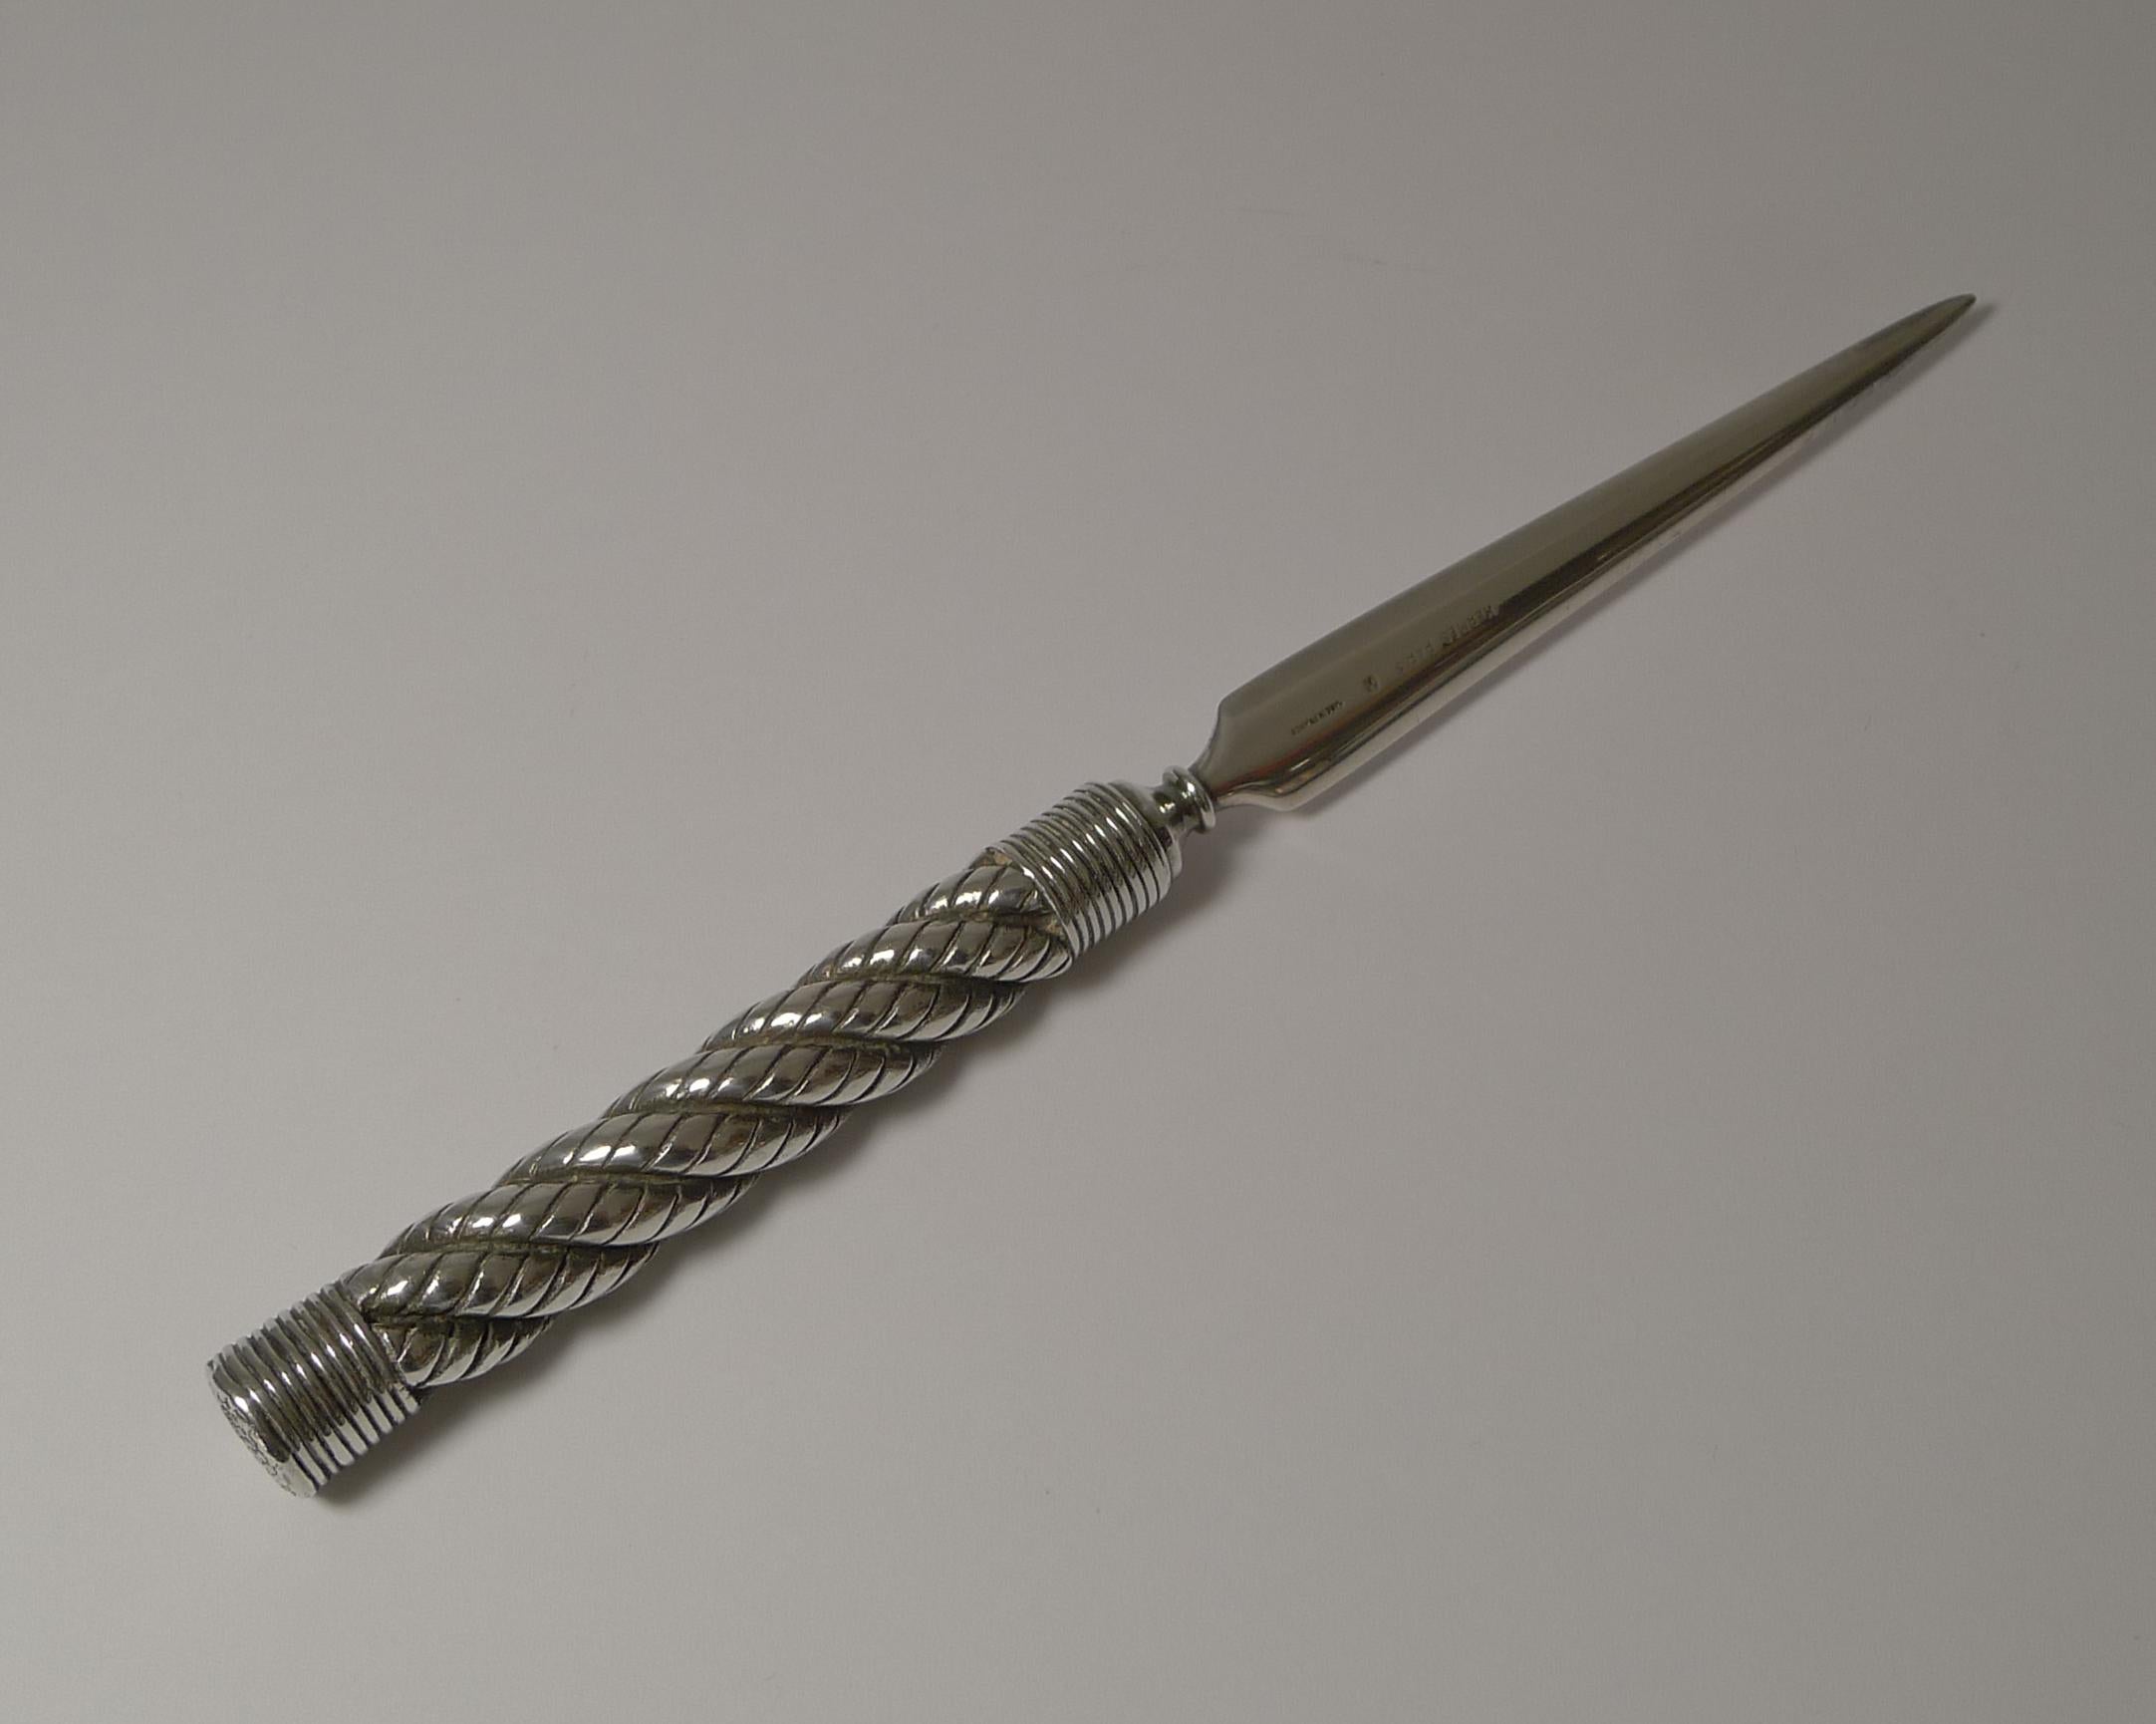 A fabulous vintage French silver plated letter opener created circa 1960s for the 